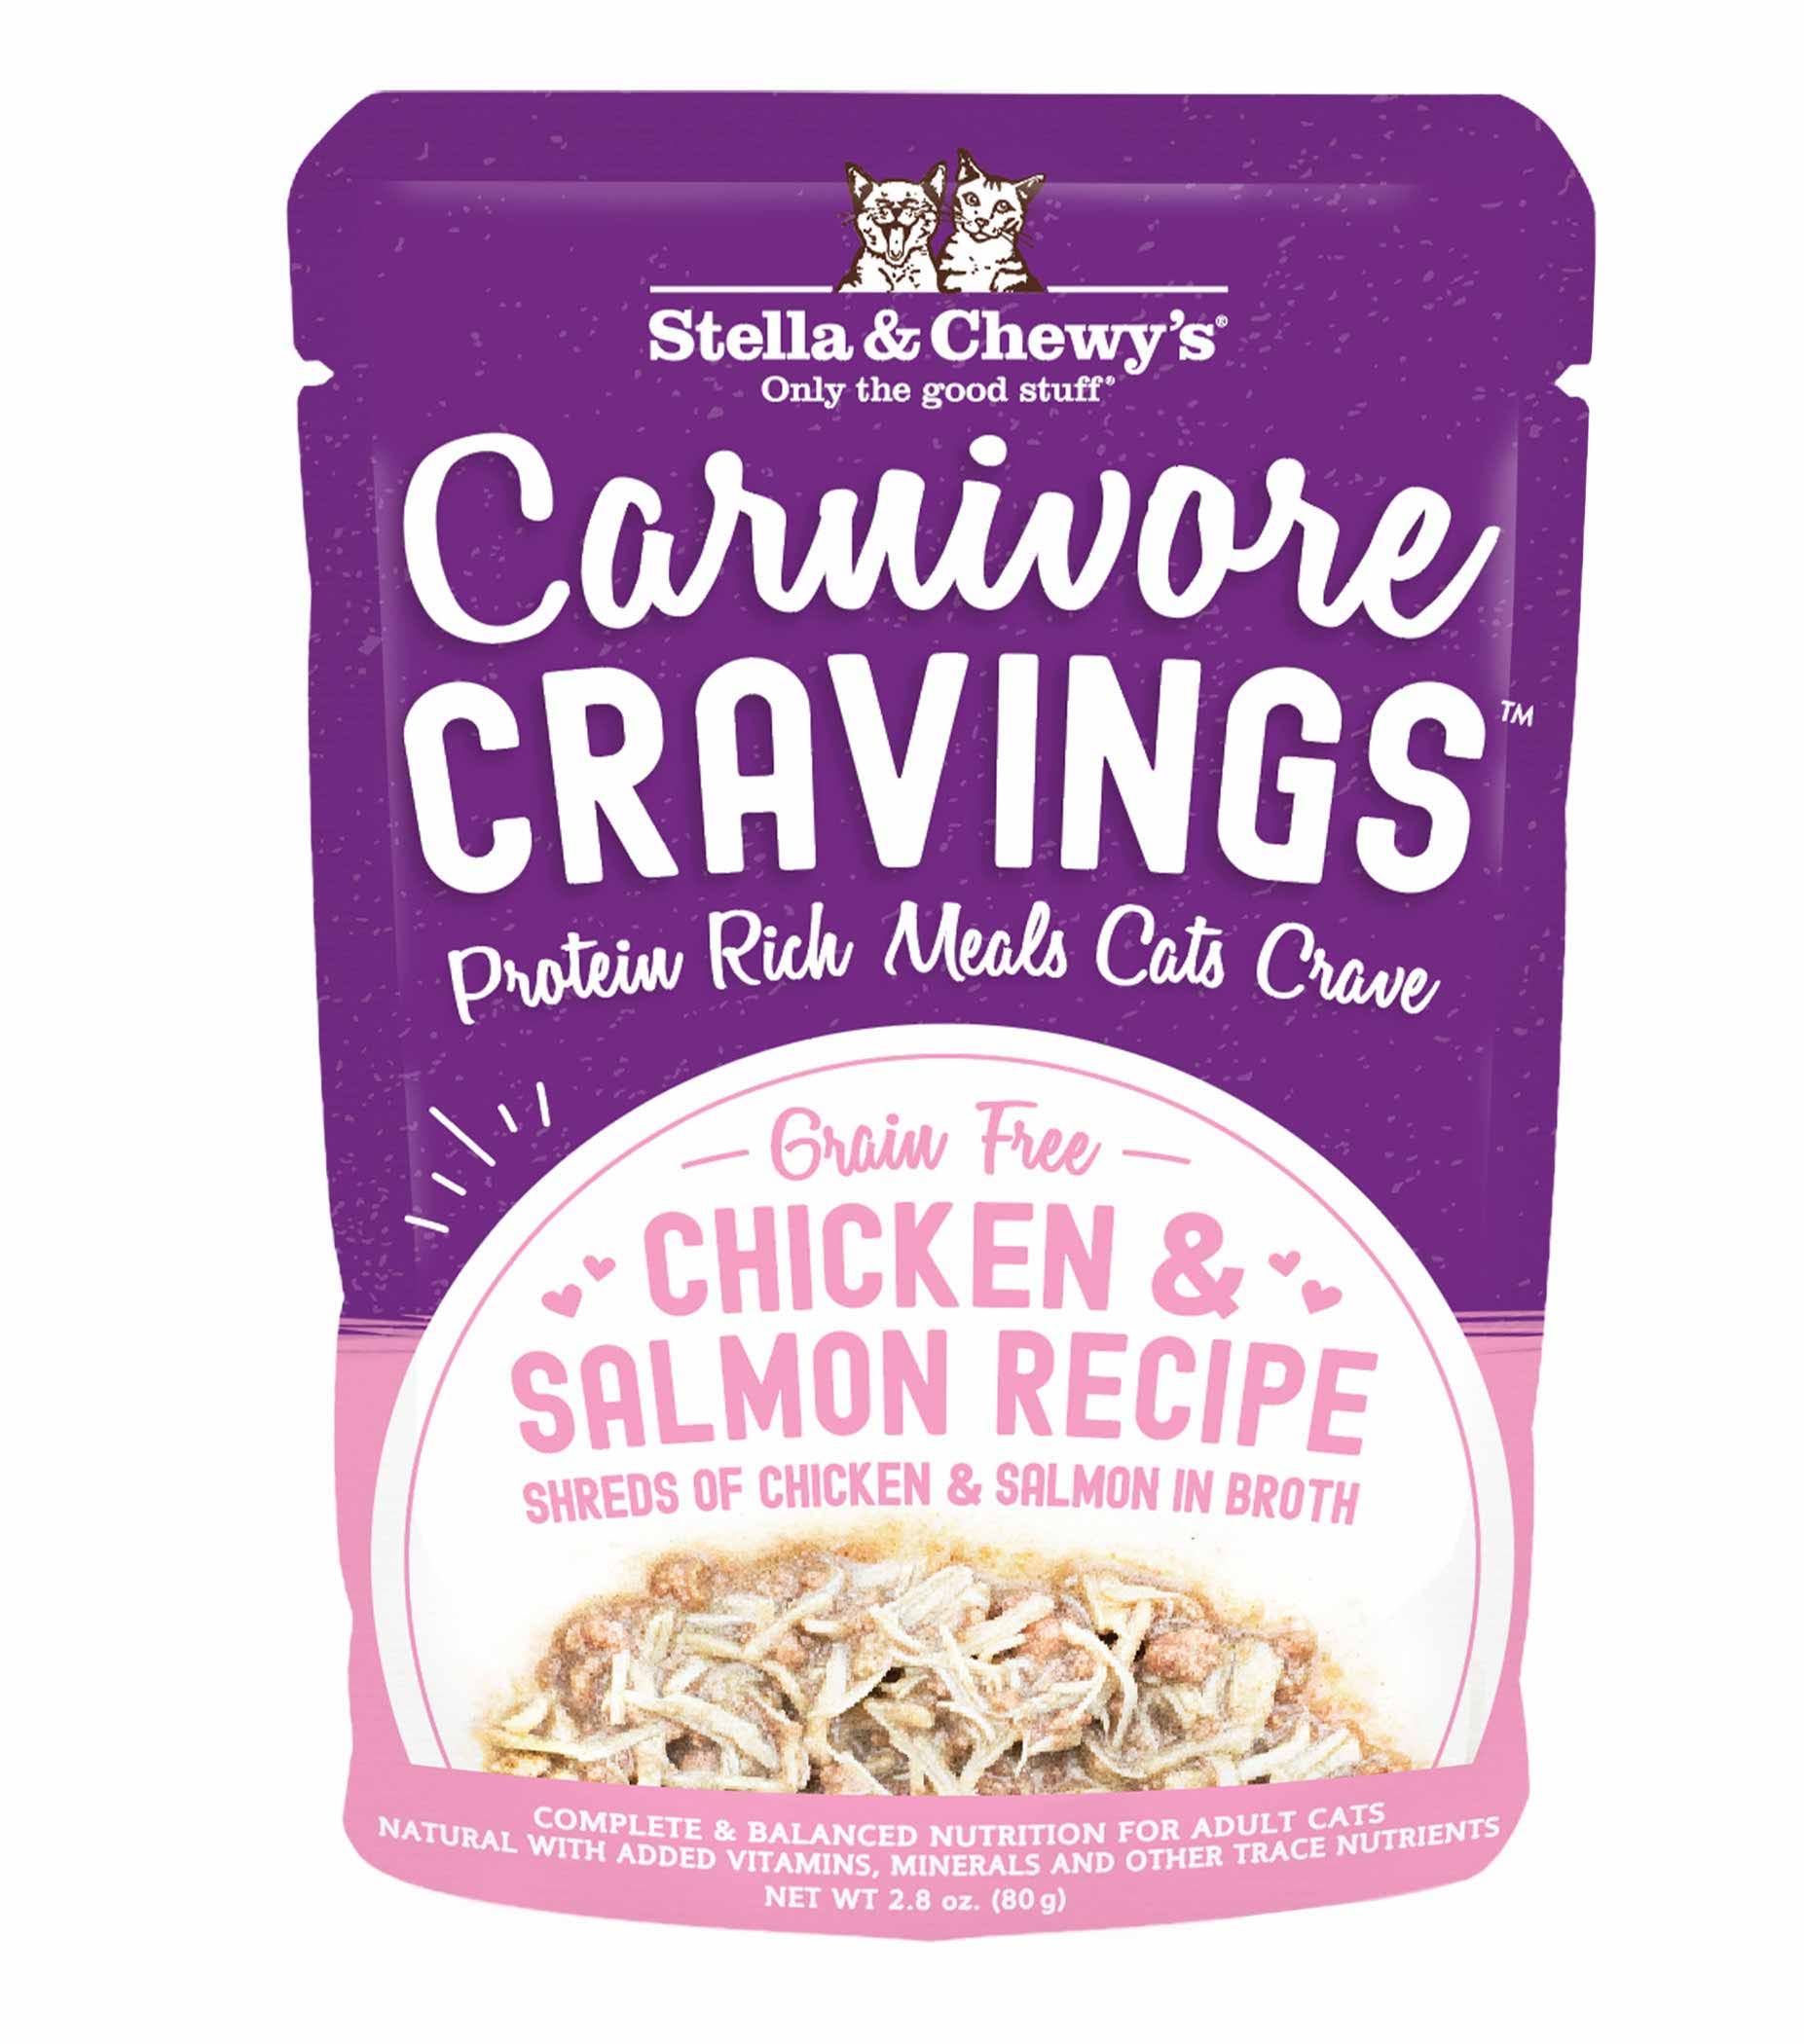 Stella & Chewy's 2.8 oz Carnivore Cravings Chicken and Salmon Recipe Cat Food